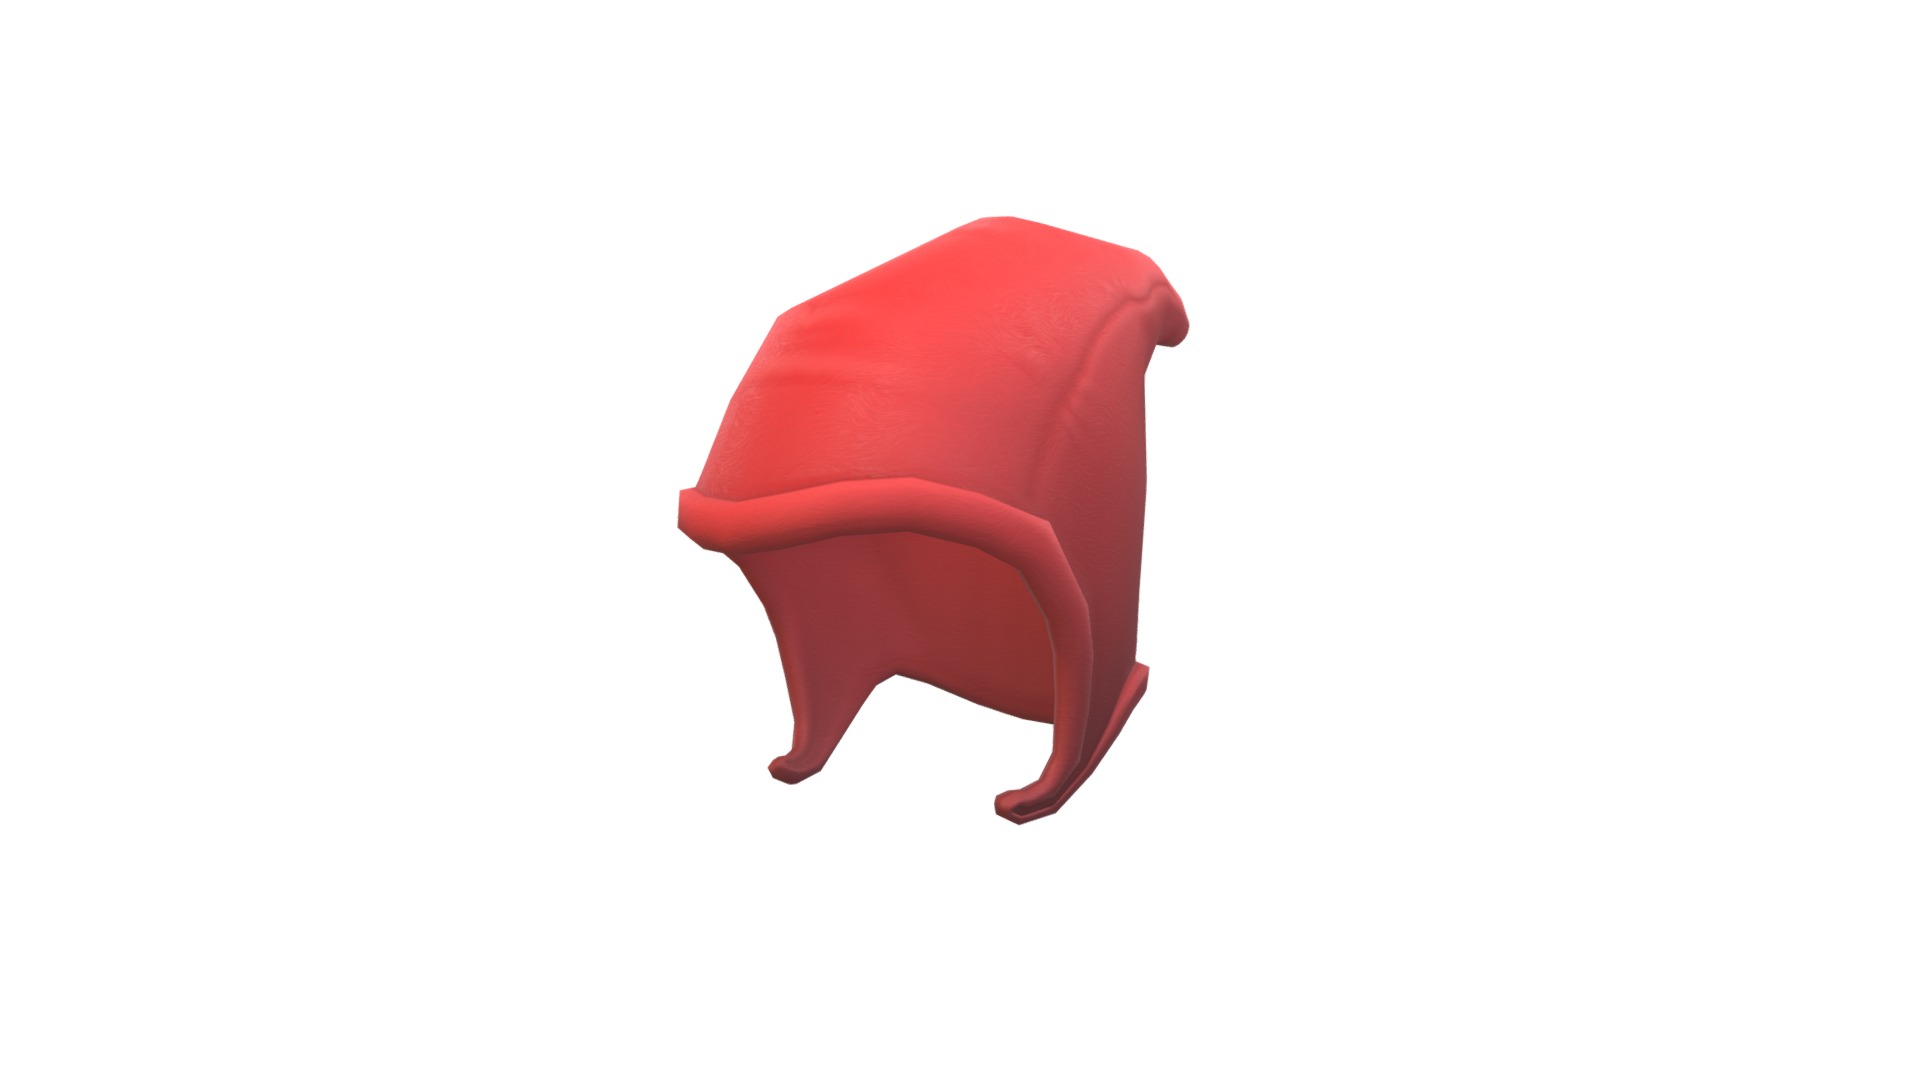 3D model Gnome Hat - This is a 3D model of the Gnome Hat. The 3D model is about a red plastic puzzle.